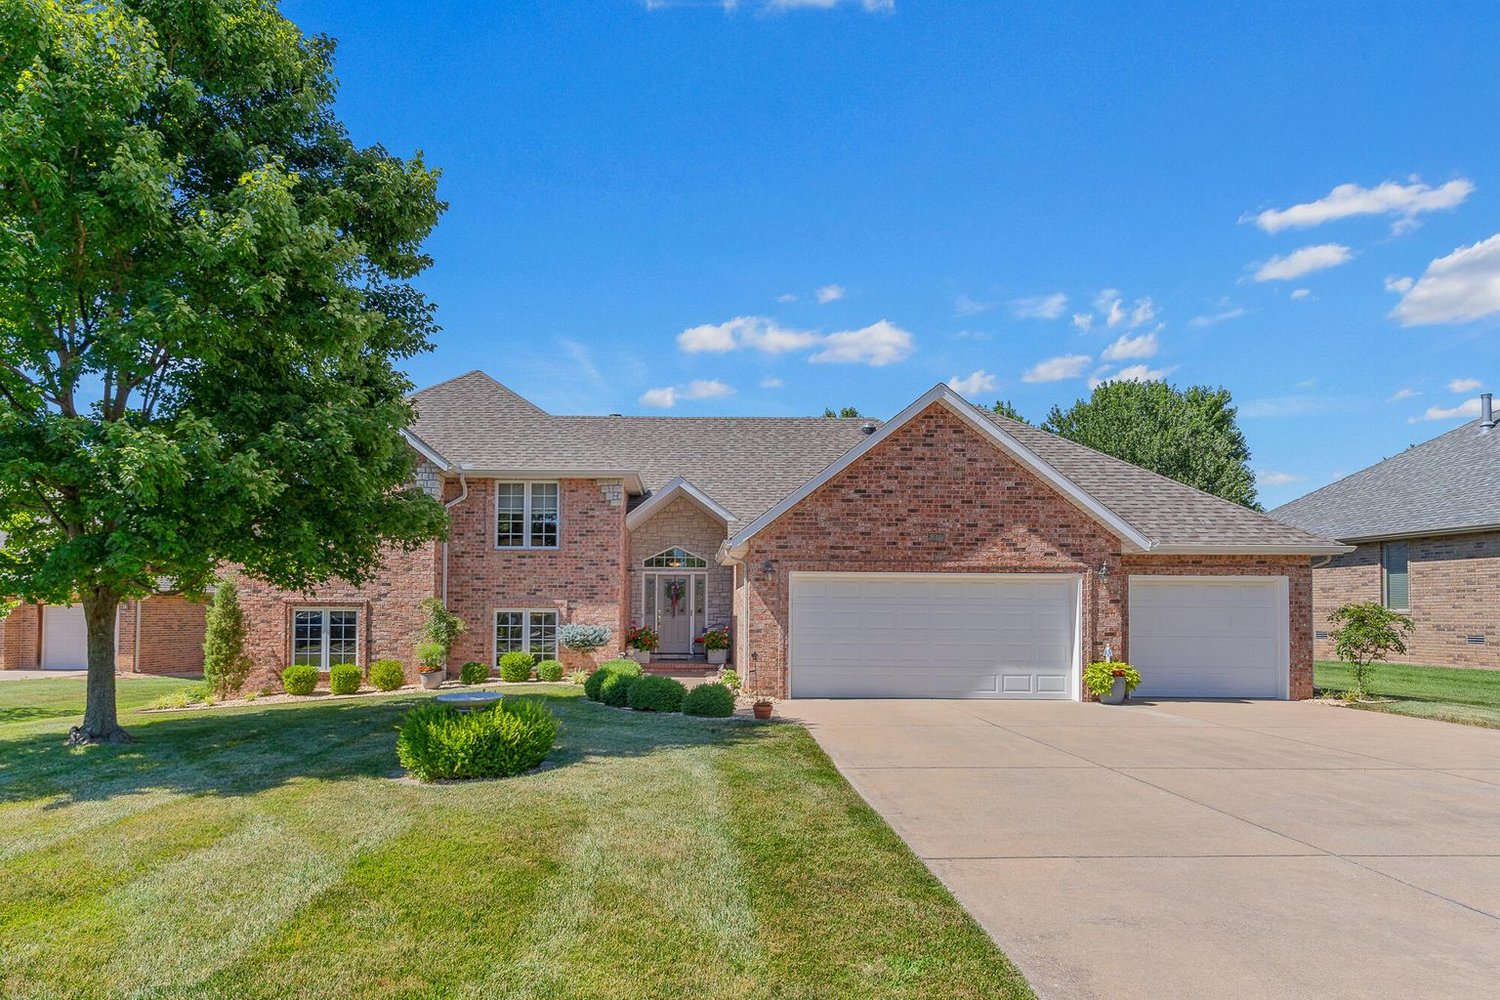 831 E. Sterling Ridge Court
$530,000
Bedrooms: 5
Bathrooms: 4
Listing firm: EXP Realty LLC